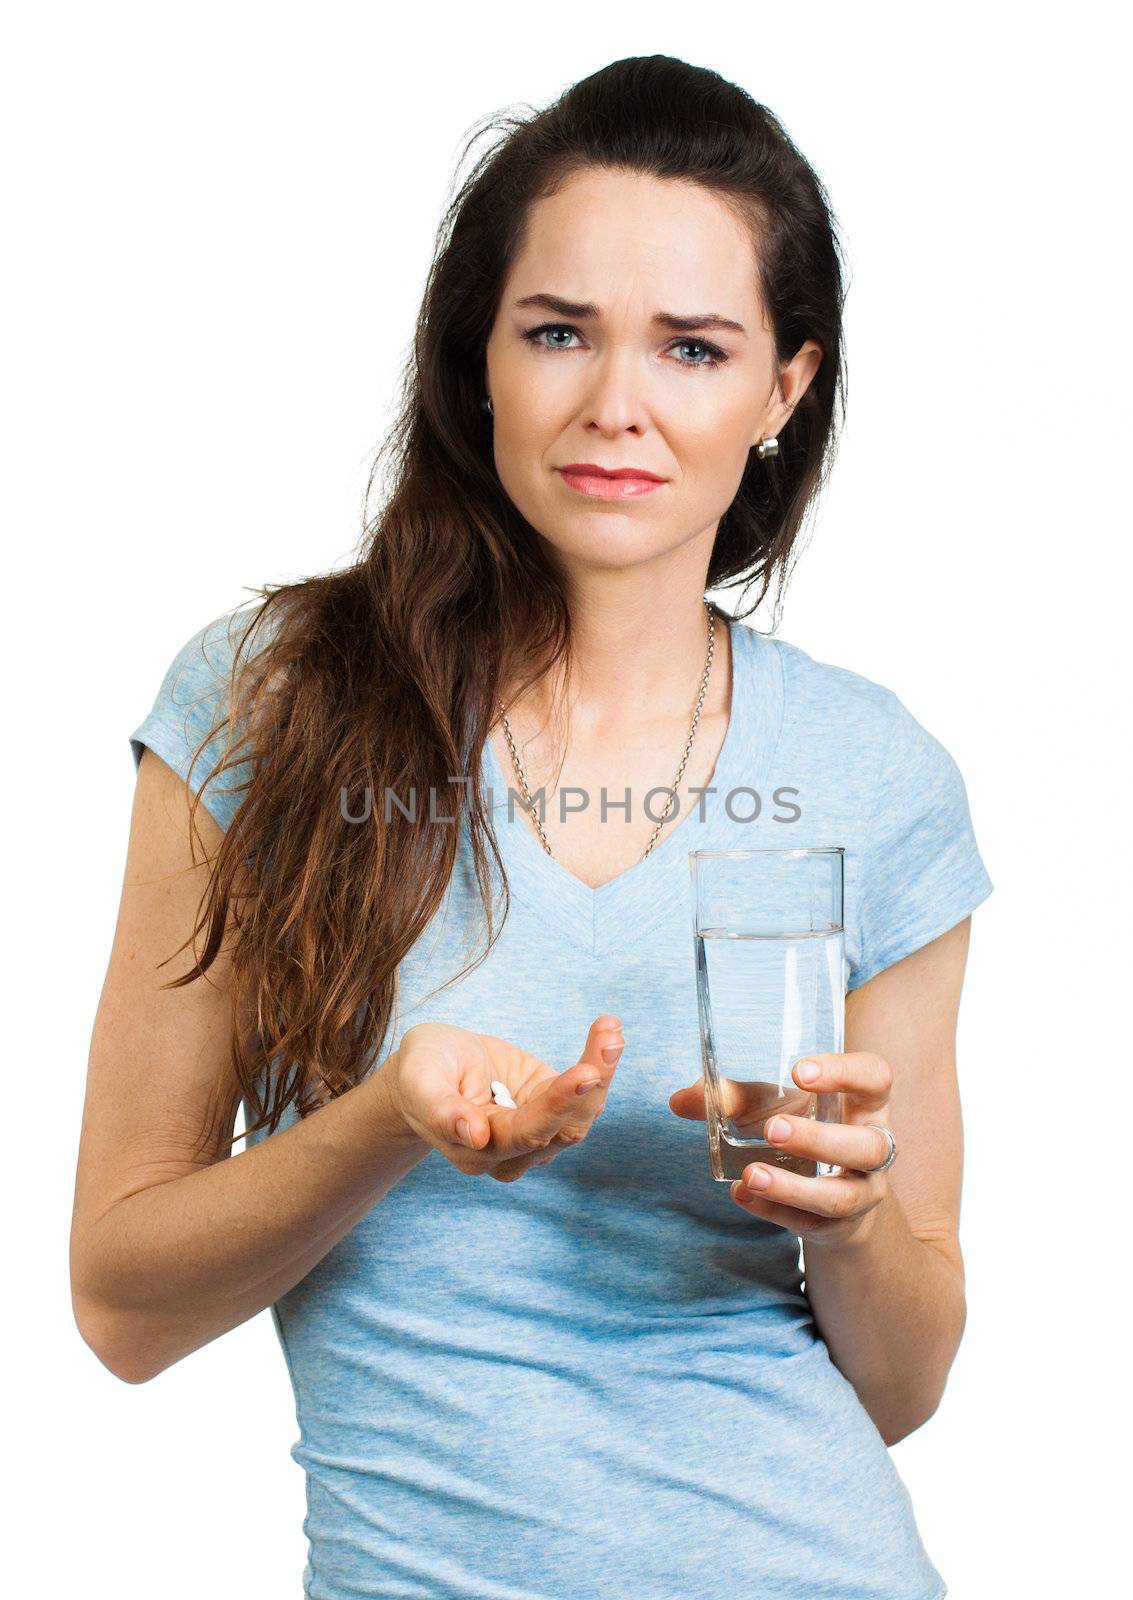 An unhappy woman in pain holding glass of water and pain killer pill, looking at camera. Isolated on white.